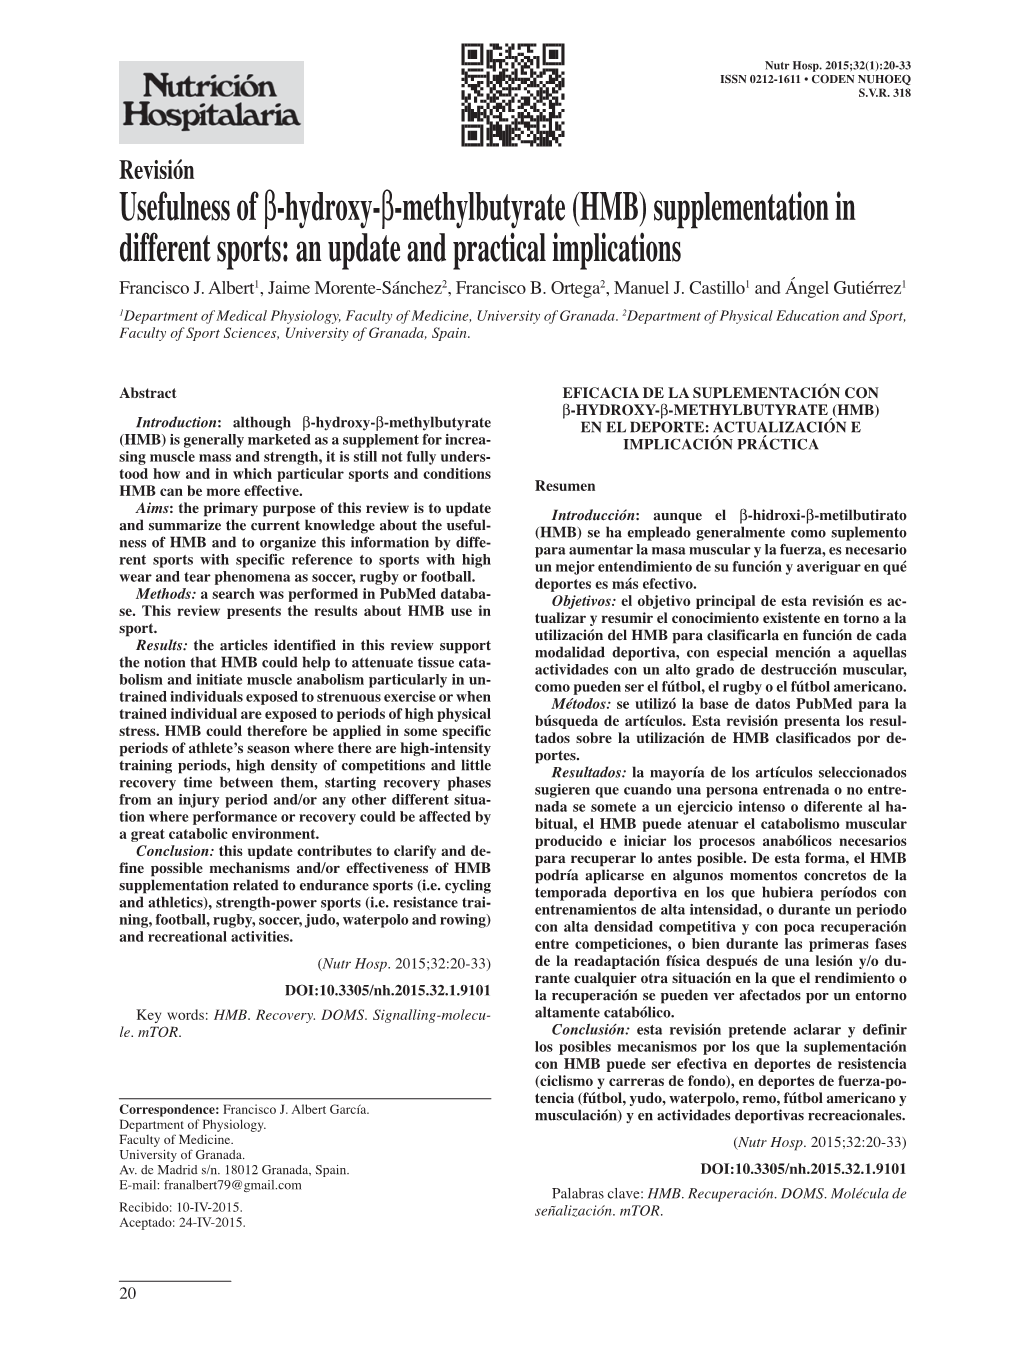 Usefulness of Β-Hydroxy-Β-Methylbutyrate (HMB) Supplementation in Different Sports: an Update and Practical Implications Francisco J